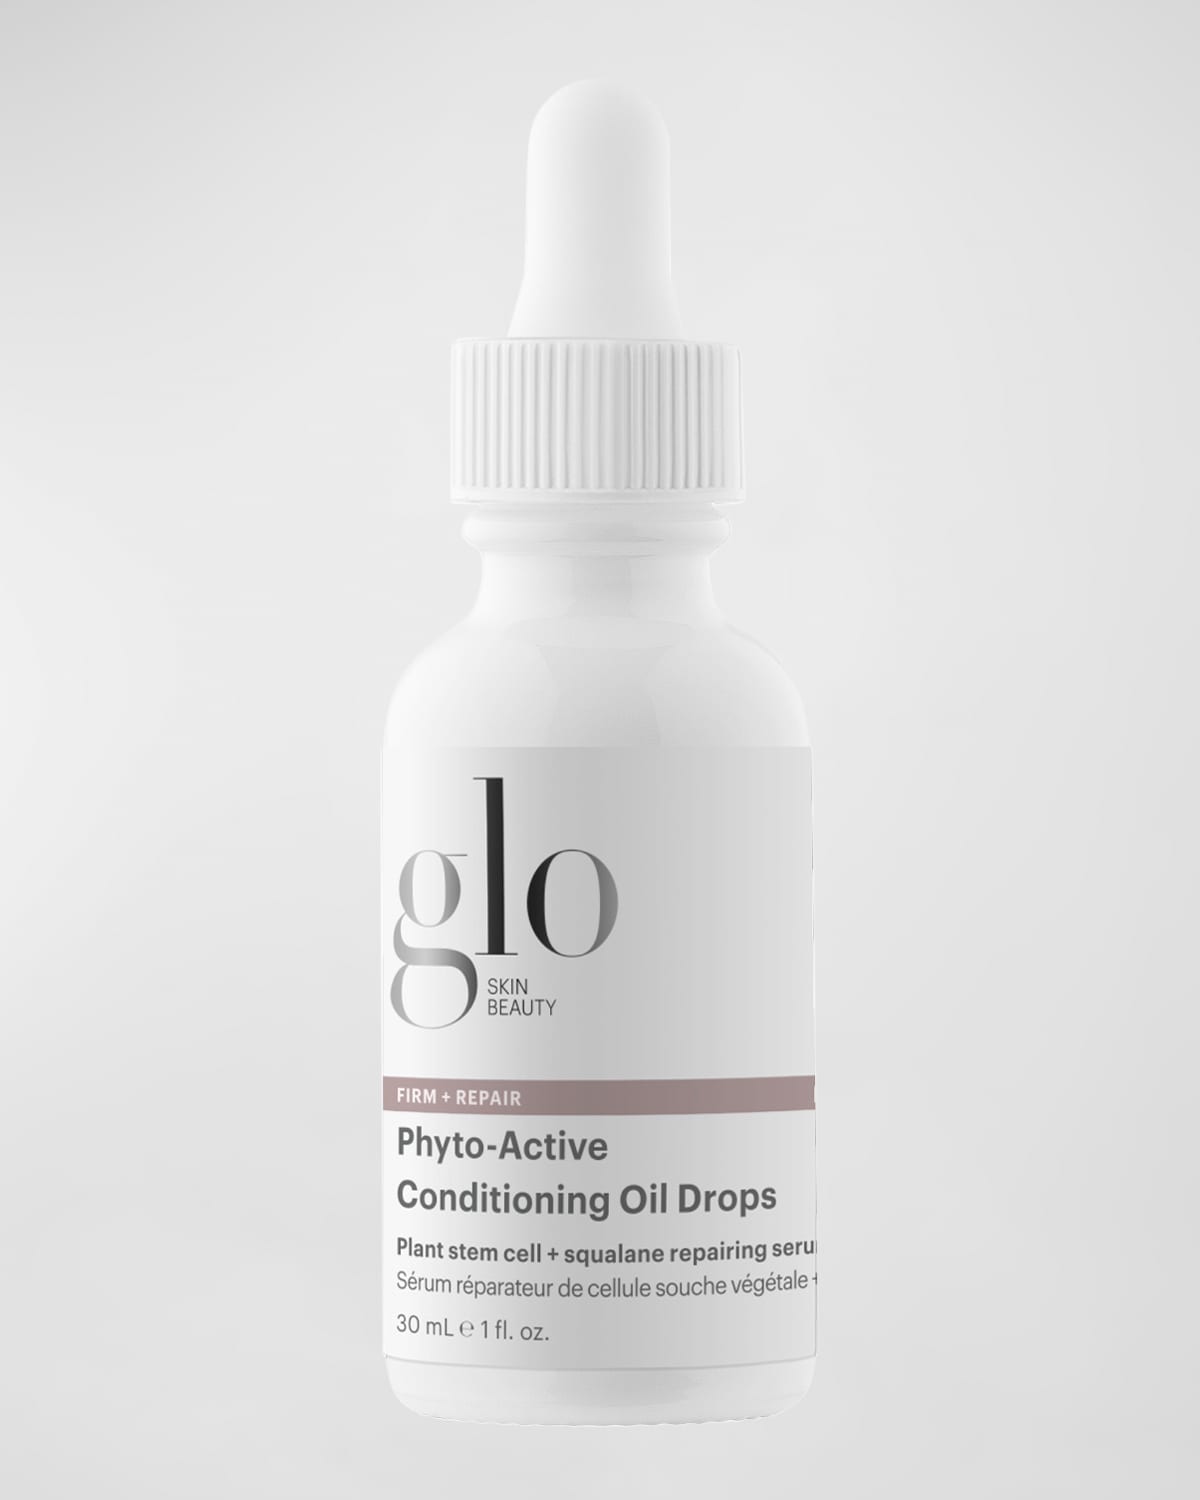 Glo Skin Beauty Phyto-Active Conditioning Oil Drops, 1 oz.